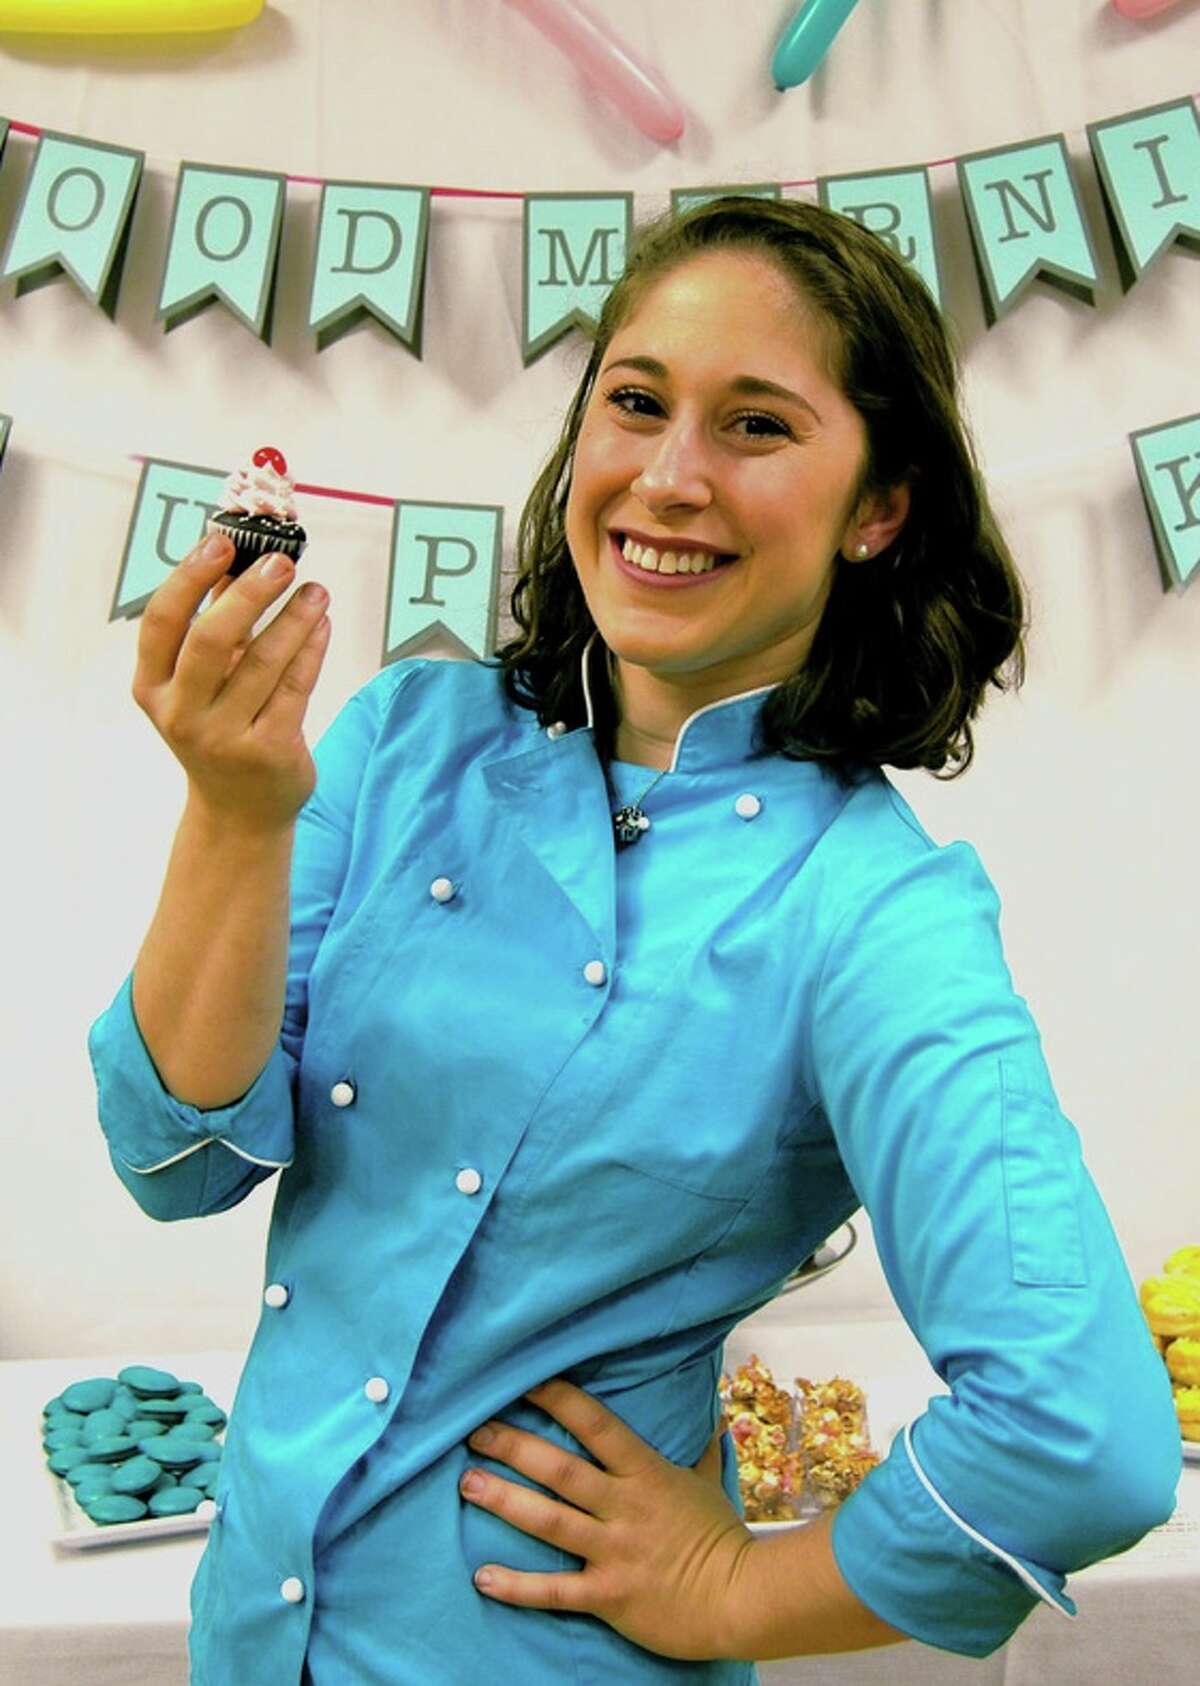 Adrianna Robles, pastry chef and owner of Good Morning Cupcake